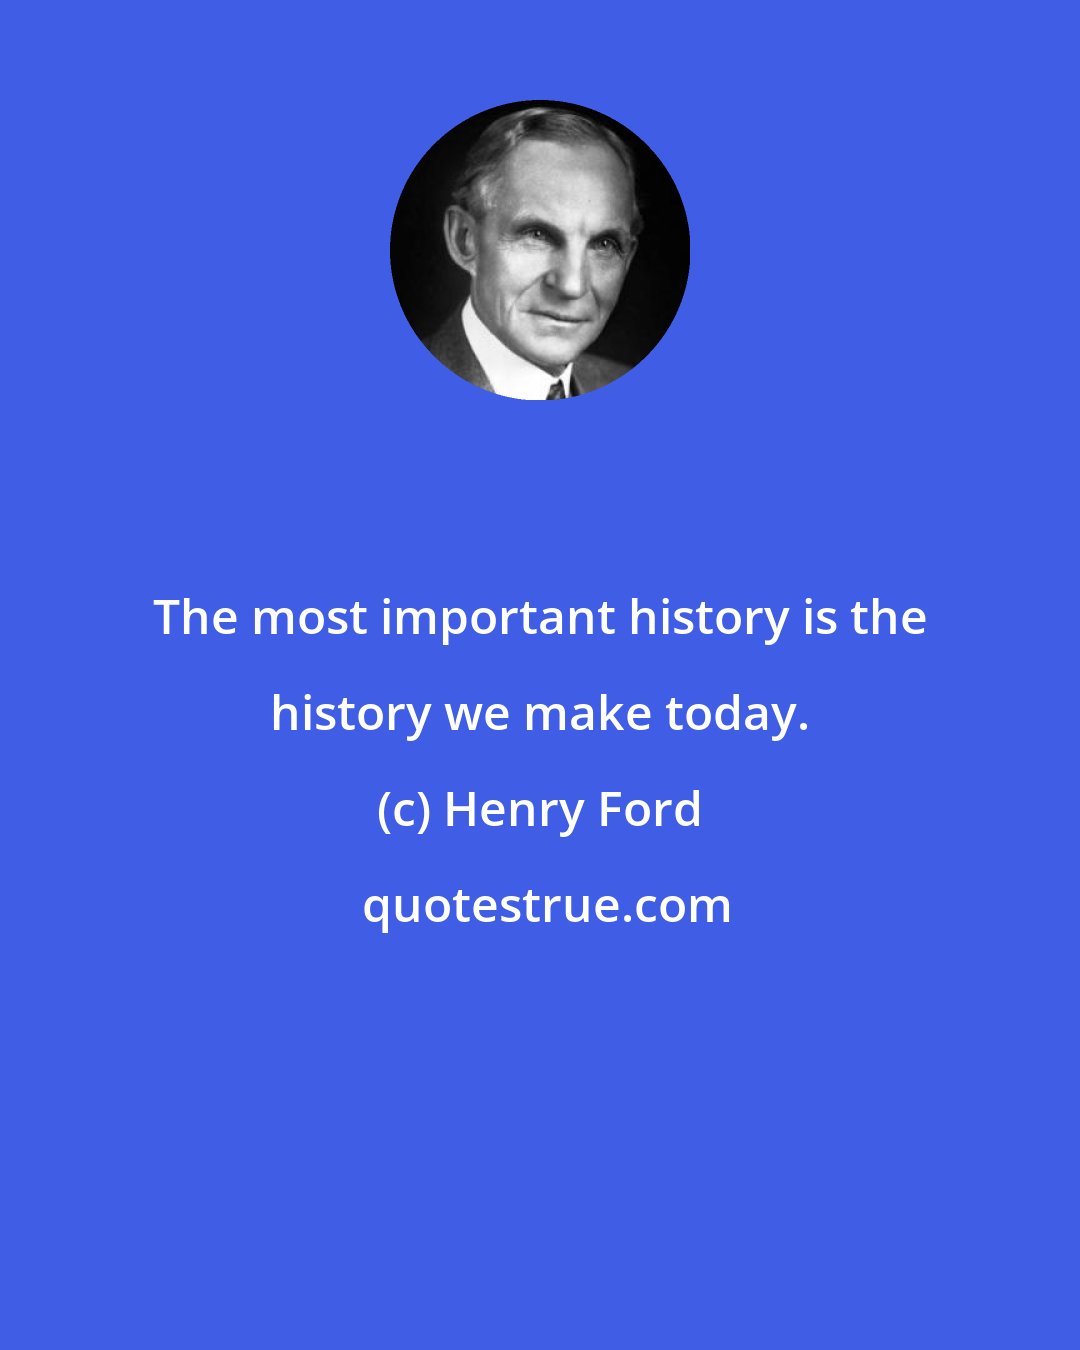 Henry Ford: The most important history is the history we make today.